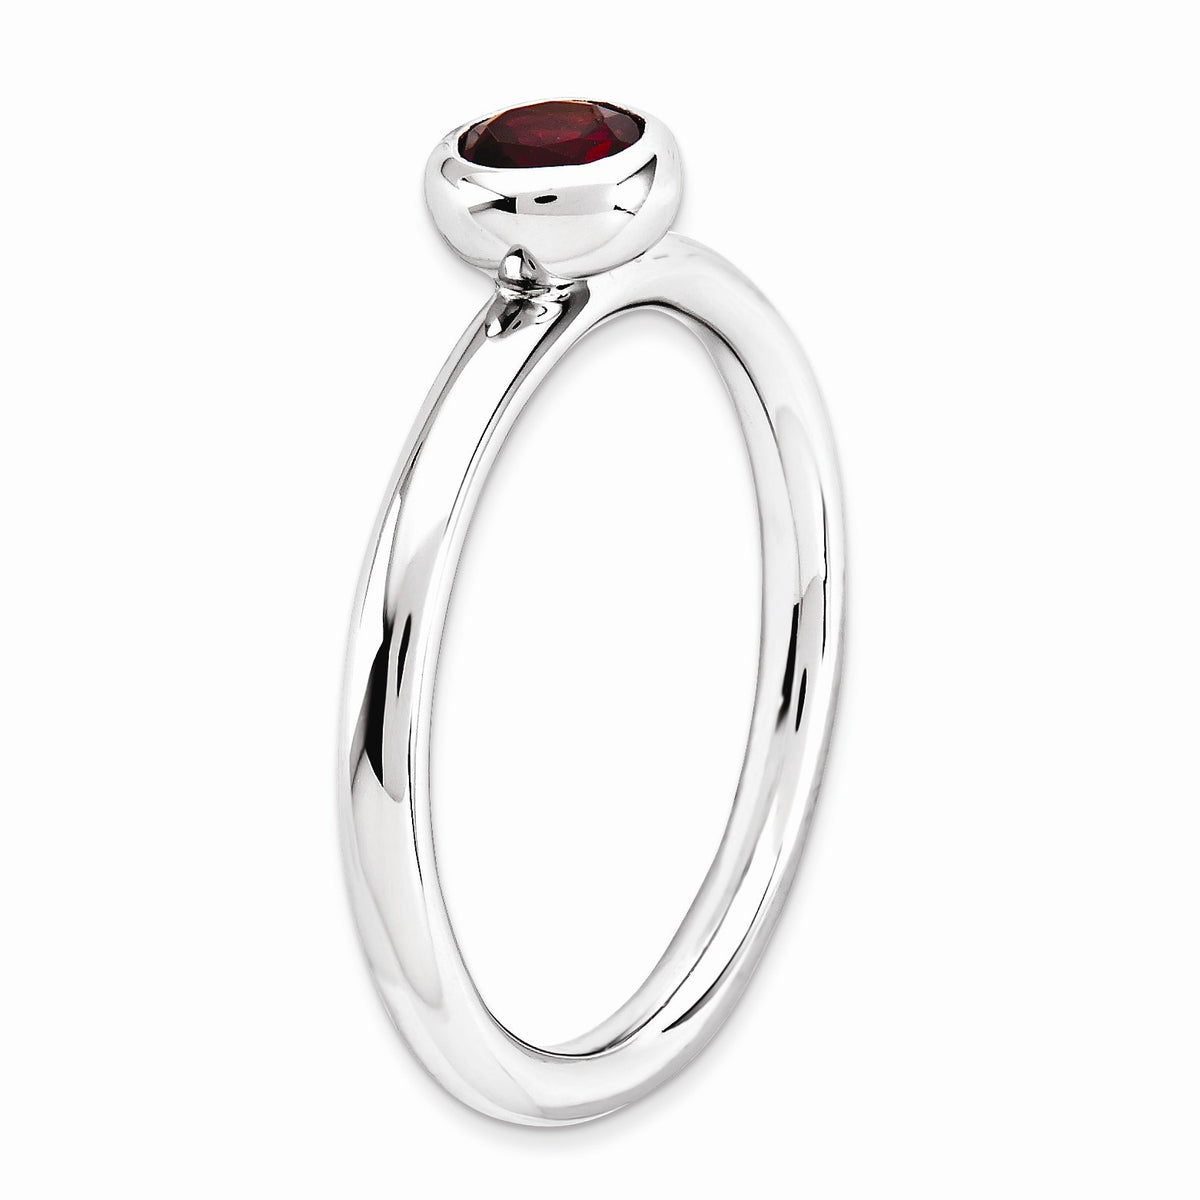 Alternate view of the Sterling Silver &amp; Garnet Stackable Low Profile 5mm Solitaire Ring by The Black Bow Jewelry Co.